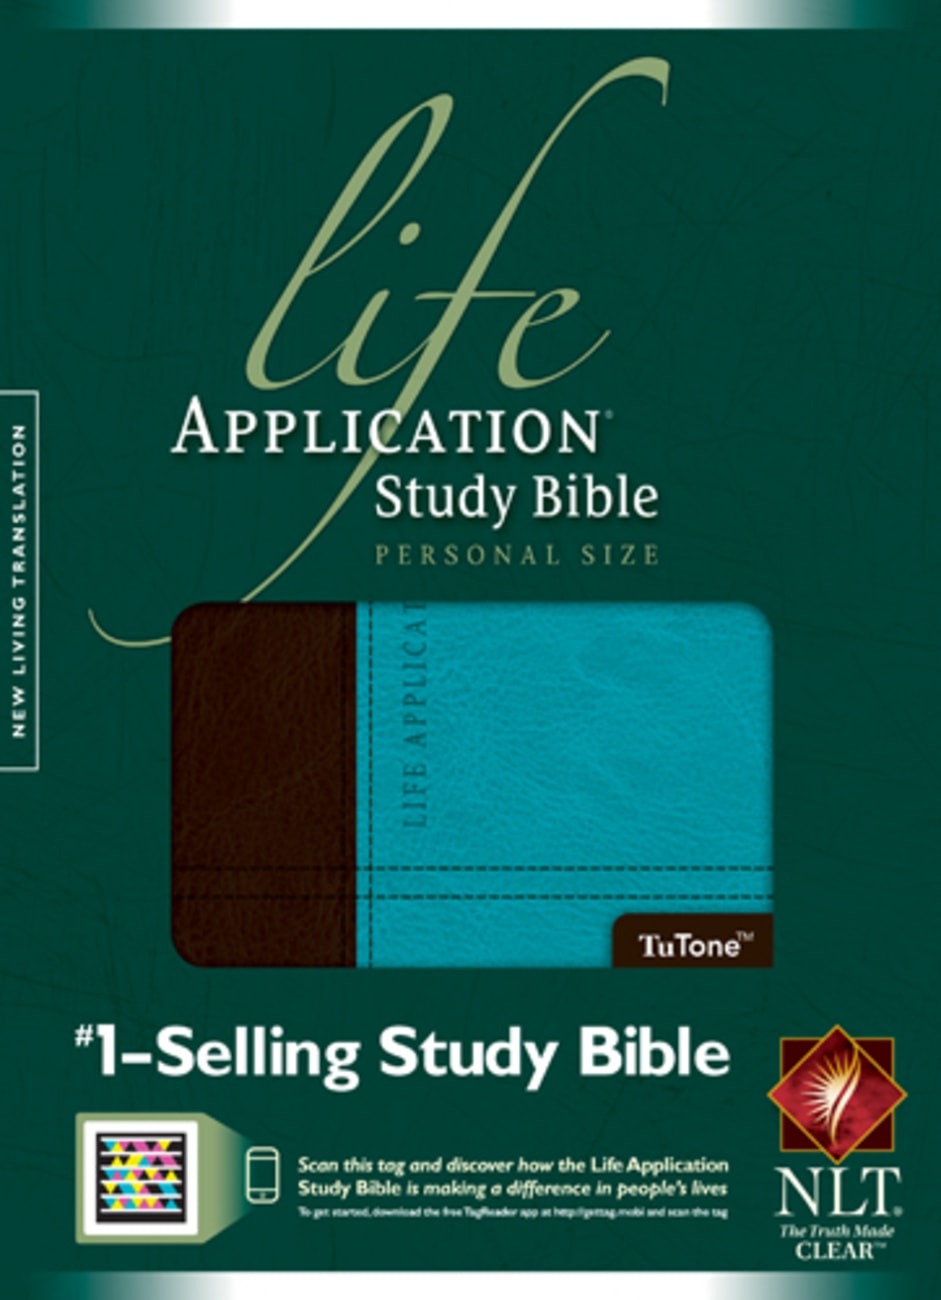 NLT Life Application Study Bible Personal Size Dark Brown/Teal (Black Letter Edition) Imitation Leather